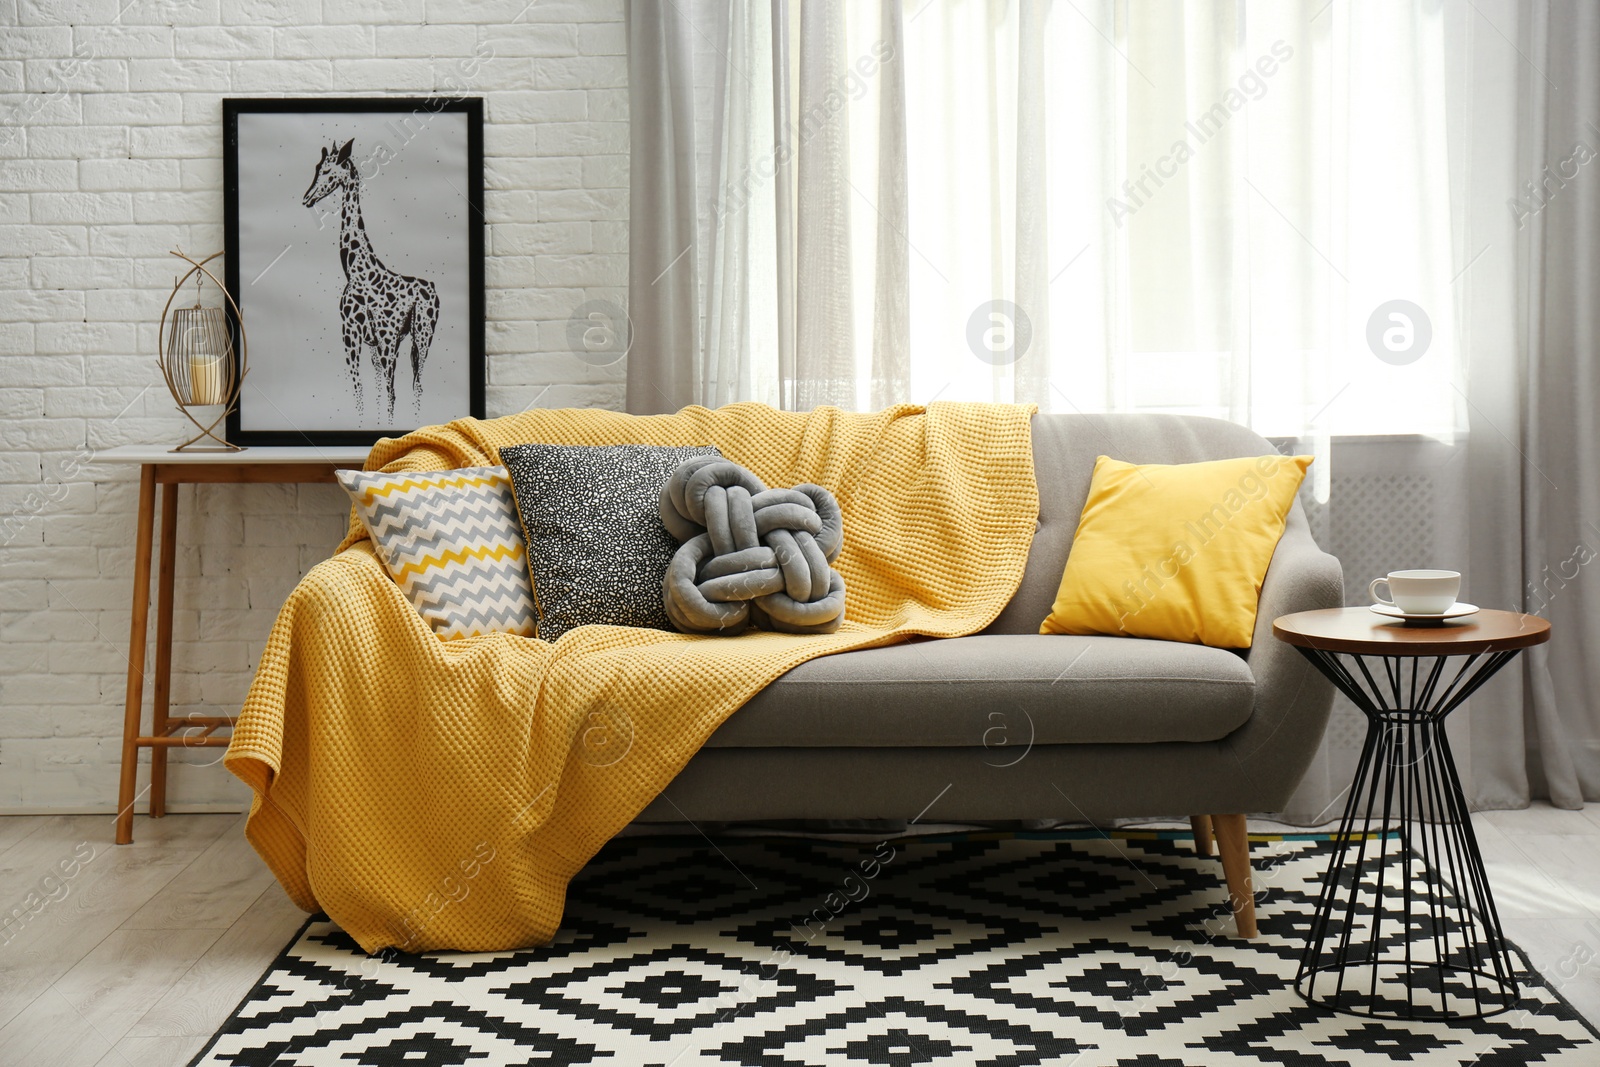 Photo of Stylish living room interior with soft pillows and yellow plaid on sofa